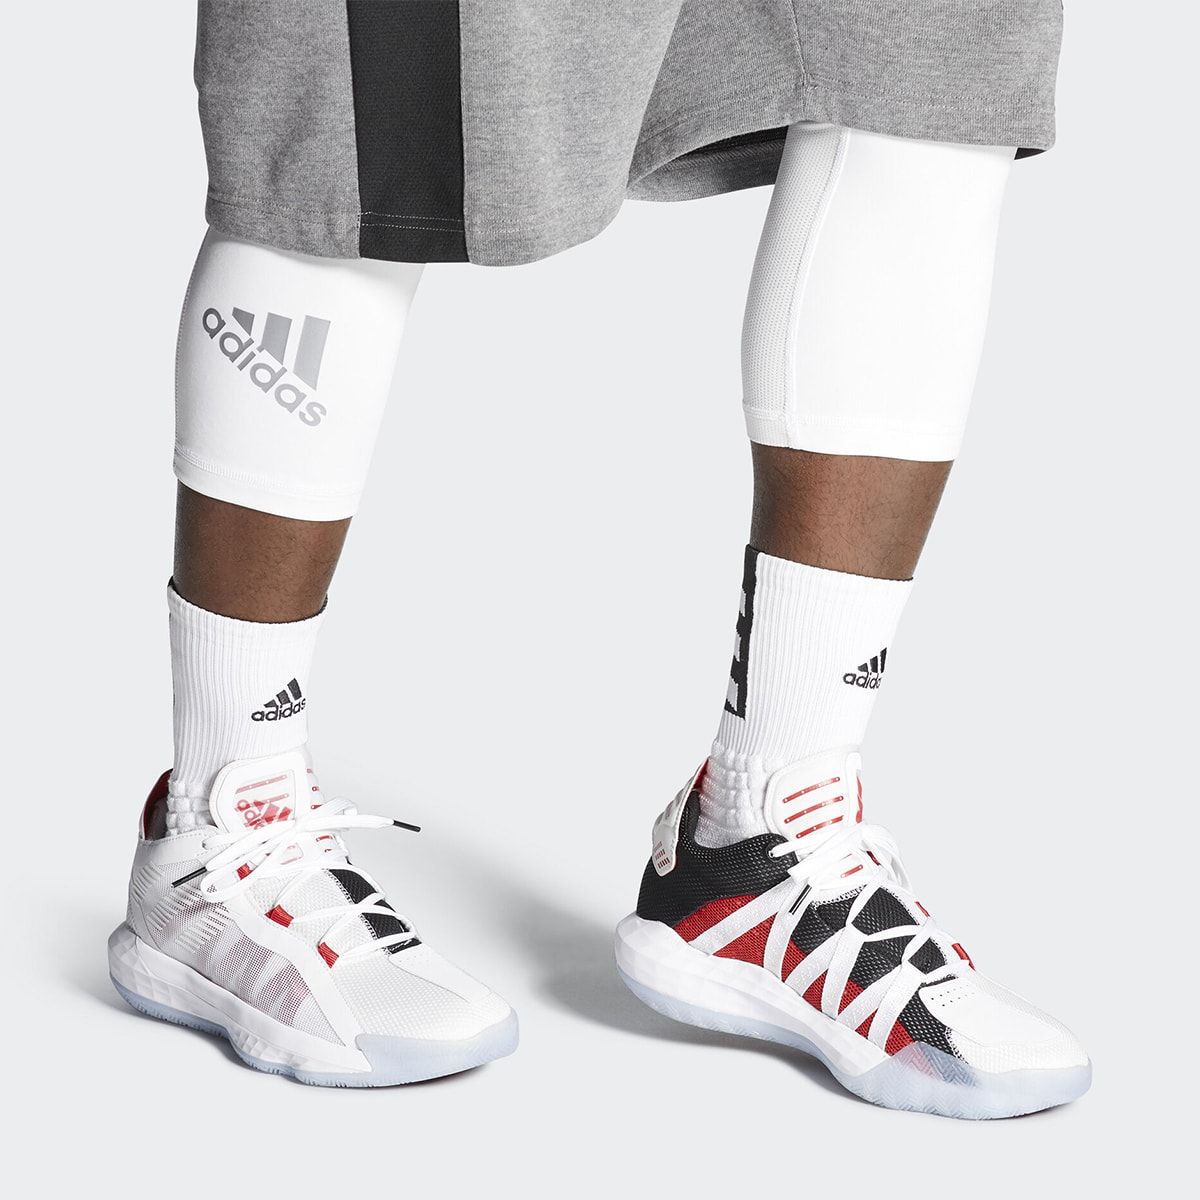 dame 6 white colorway